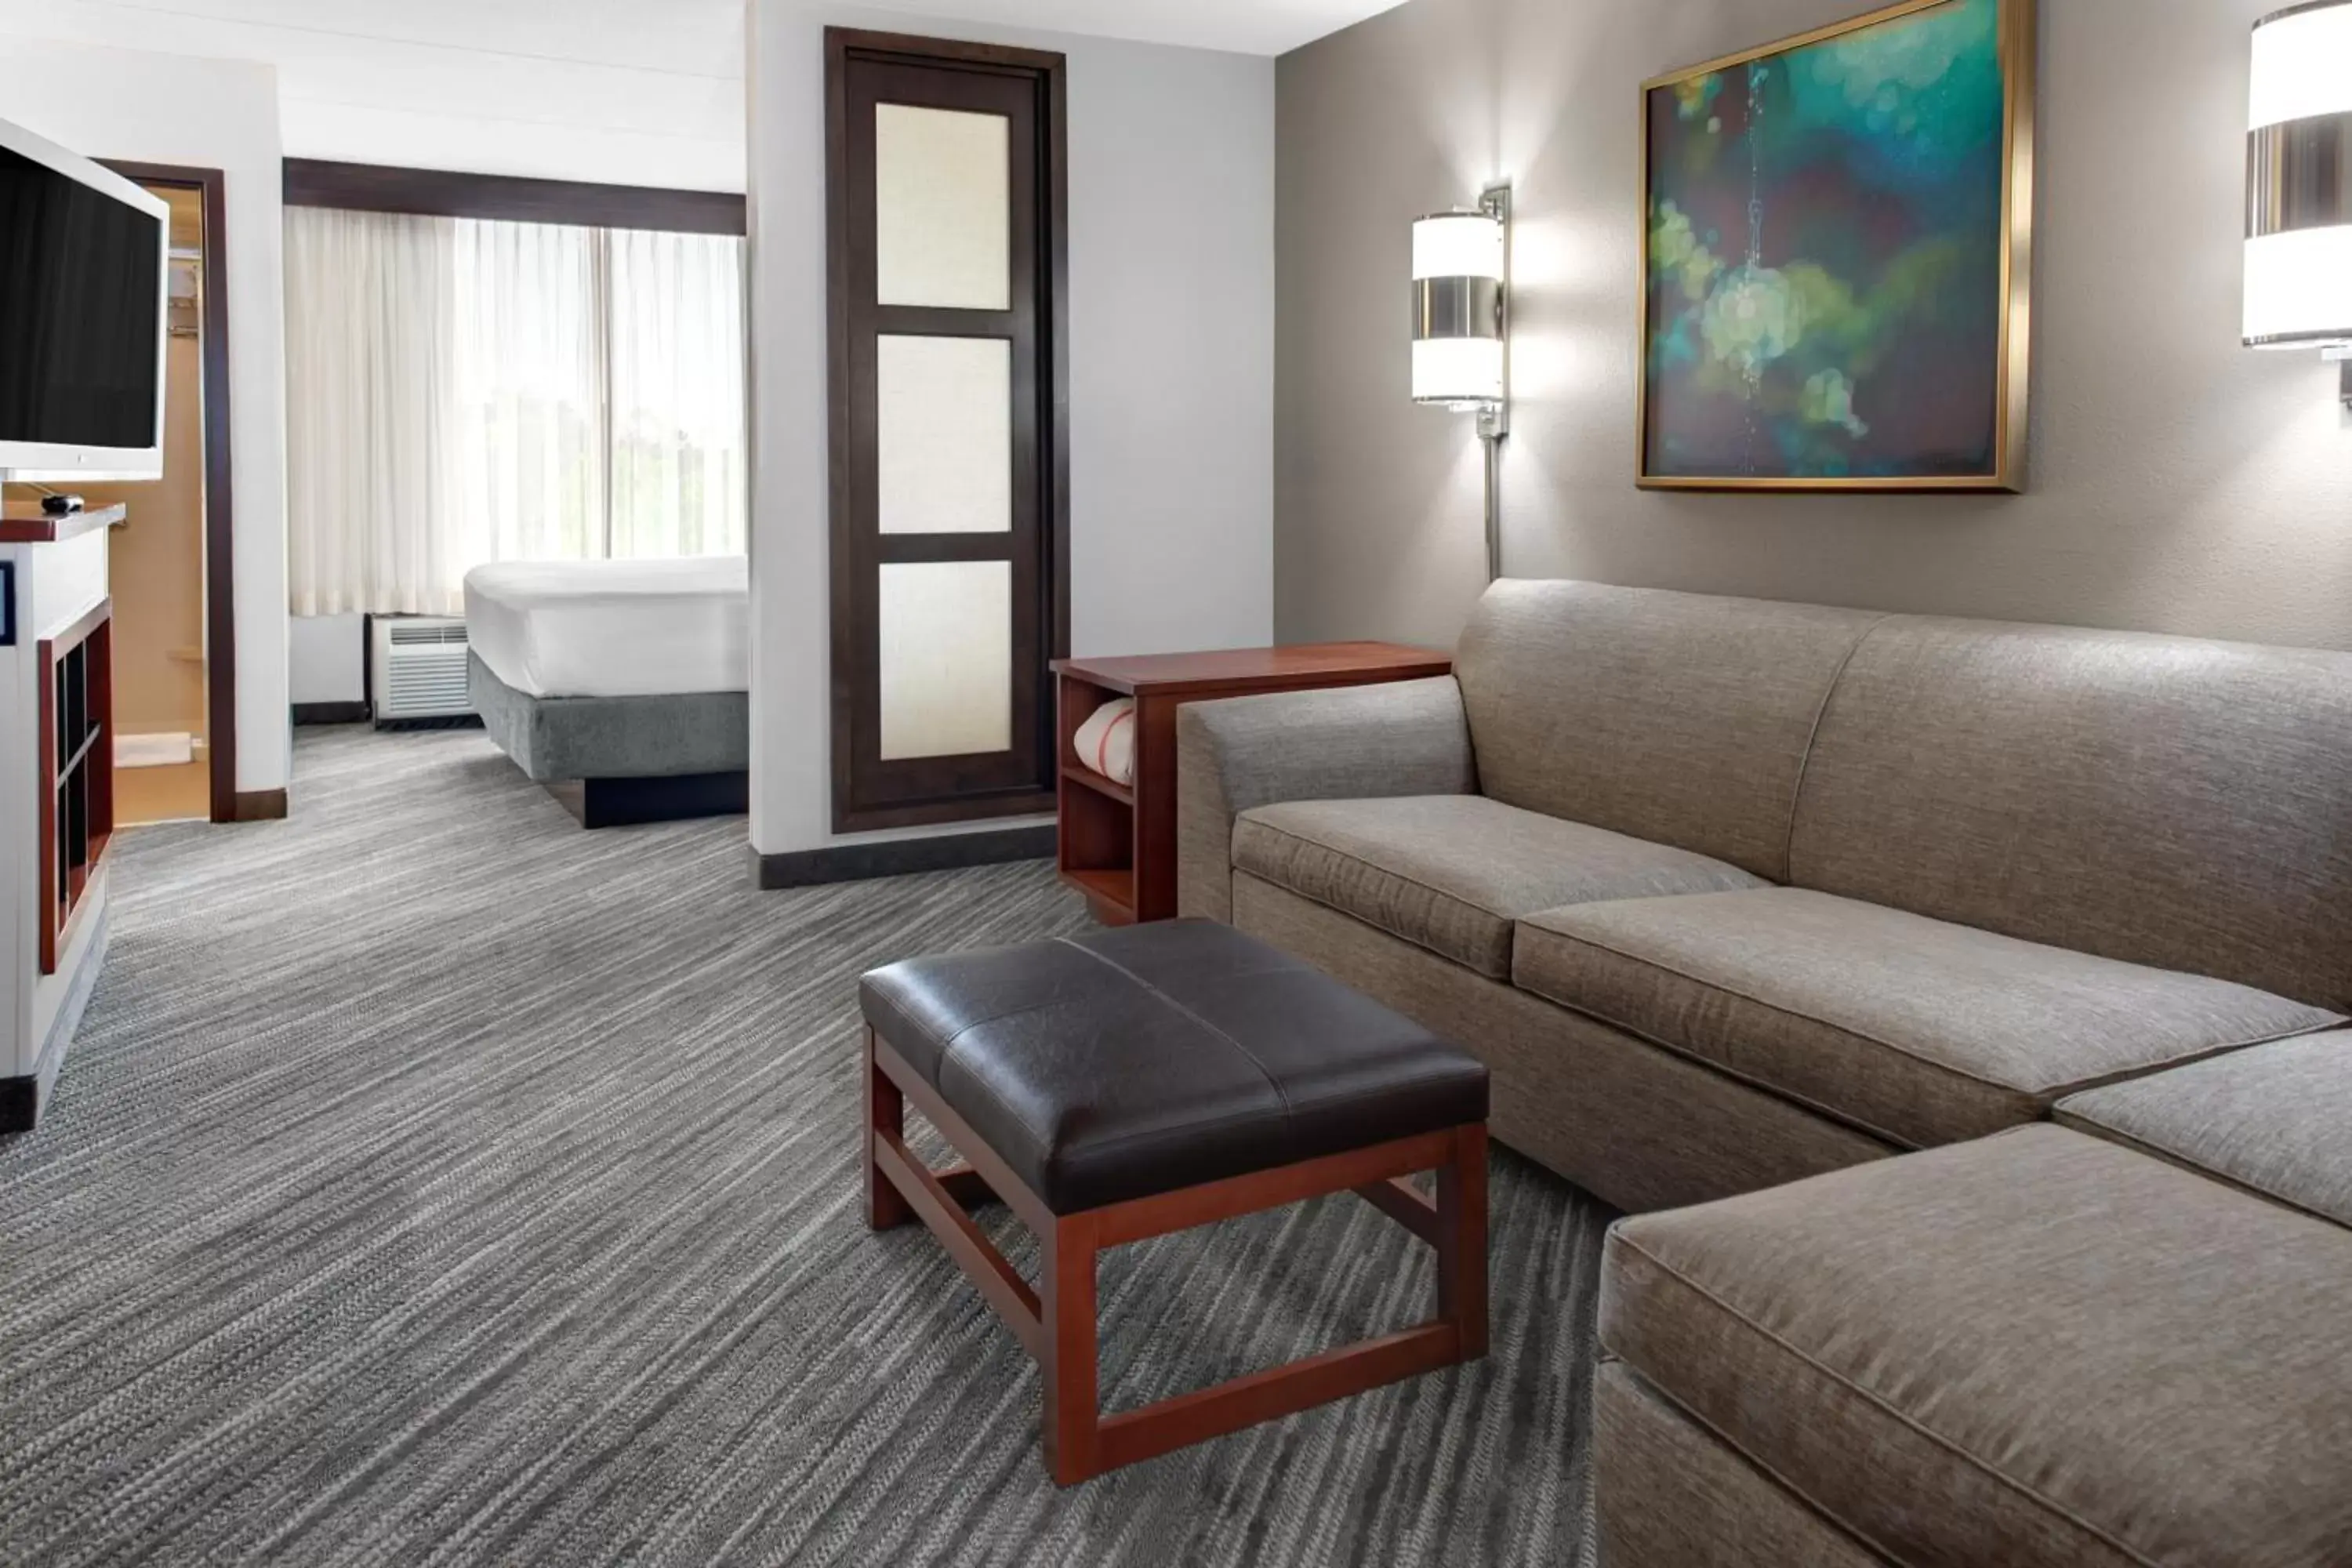 Accessible King Room With Bathtub in Extended Stay America Premier Suites - Pittsburgh - Cranberry Township - I-76